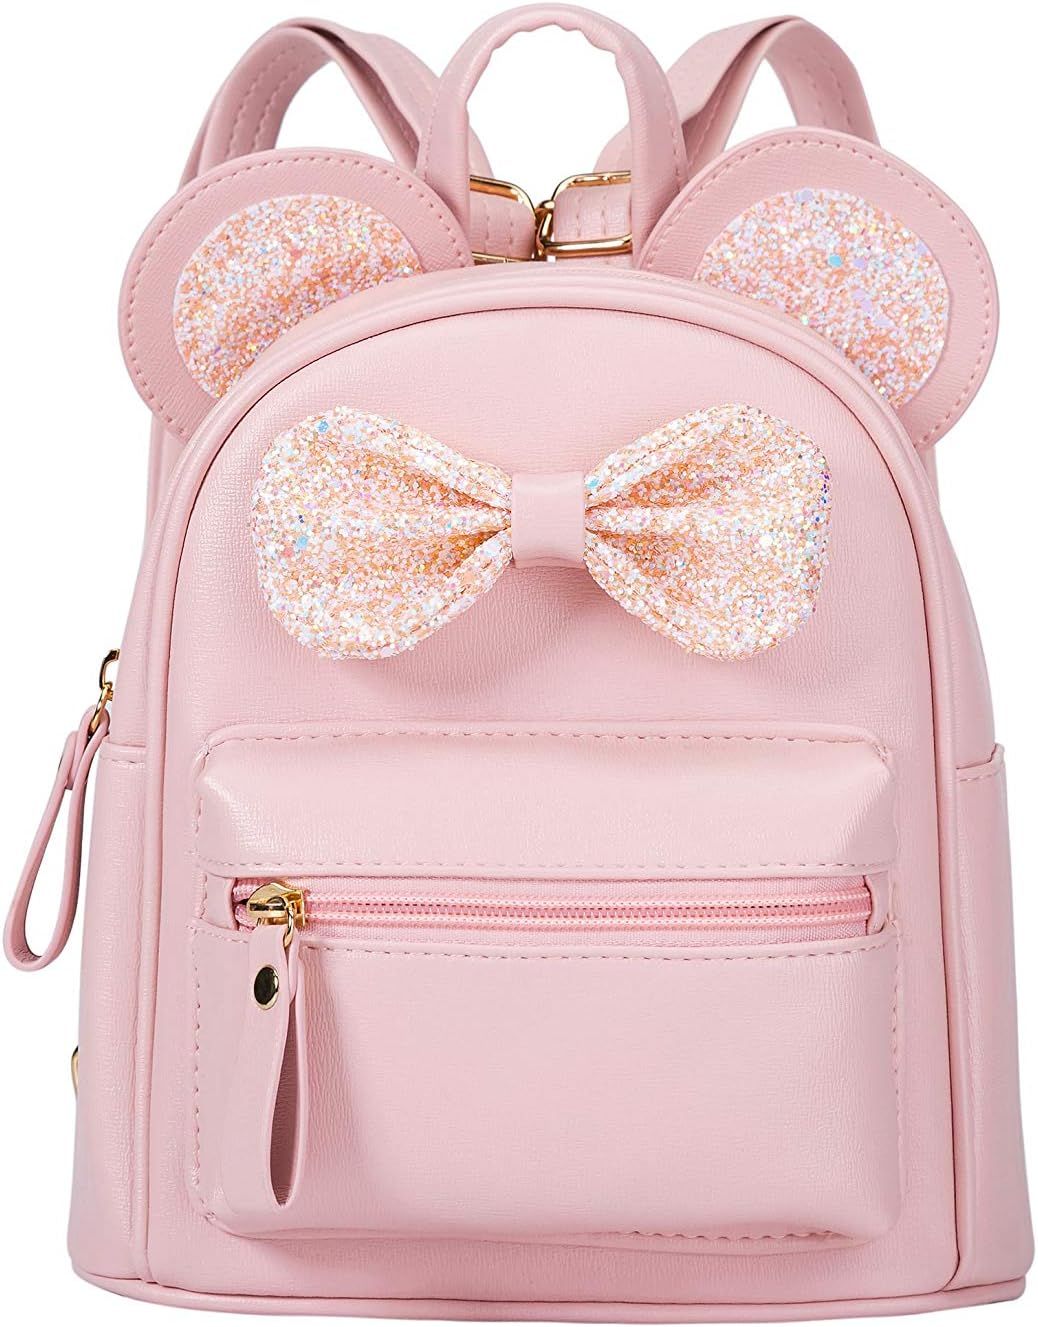 Cutest Cartoon Toddler Sequin Bow Mouse Ears Bag Mini Travelling School Shoulder Backpack for Tee... | Amazon (US)